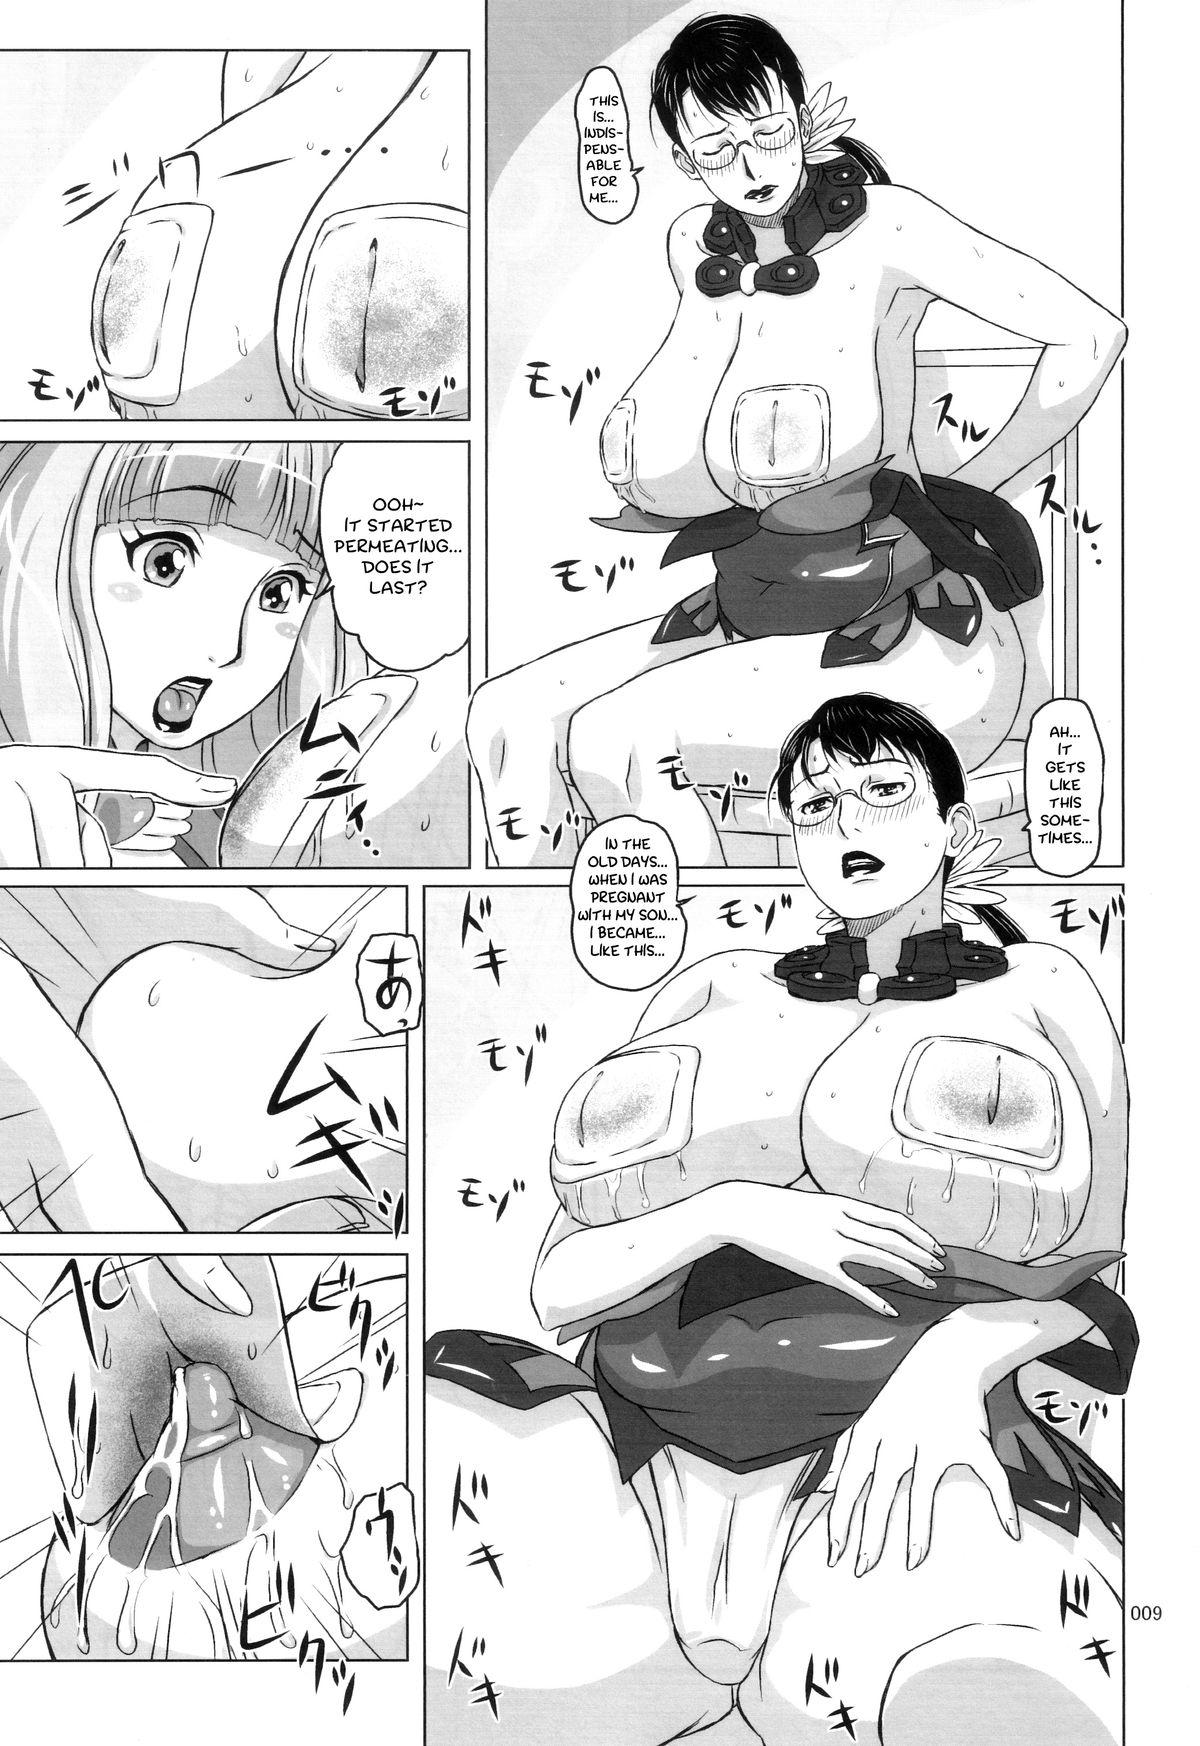 Boys Package Meat 4.5 - Queens blade Flagra - Page 8